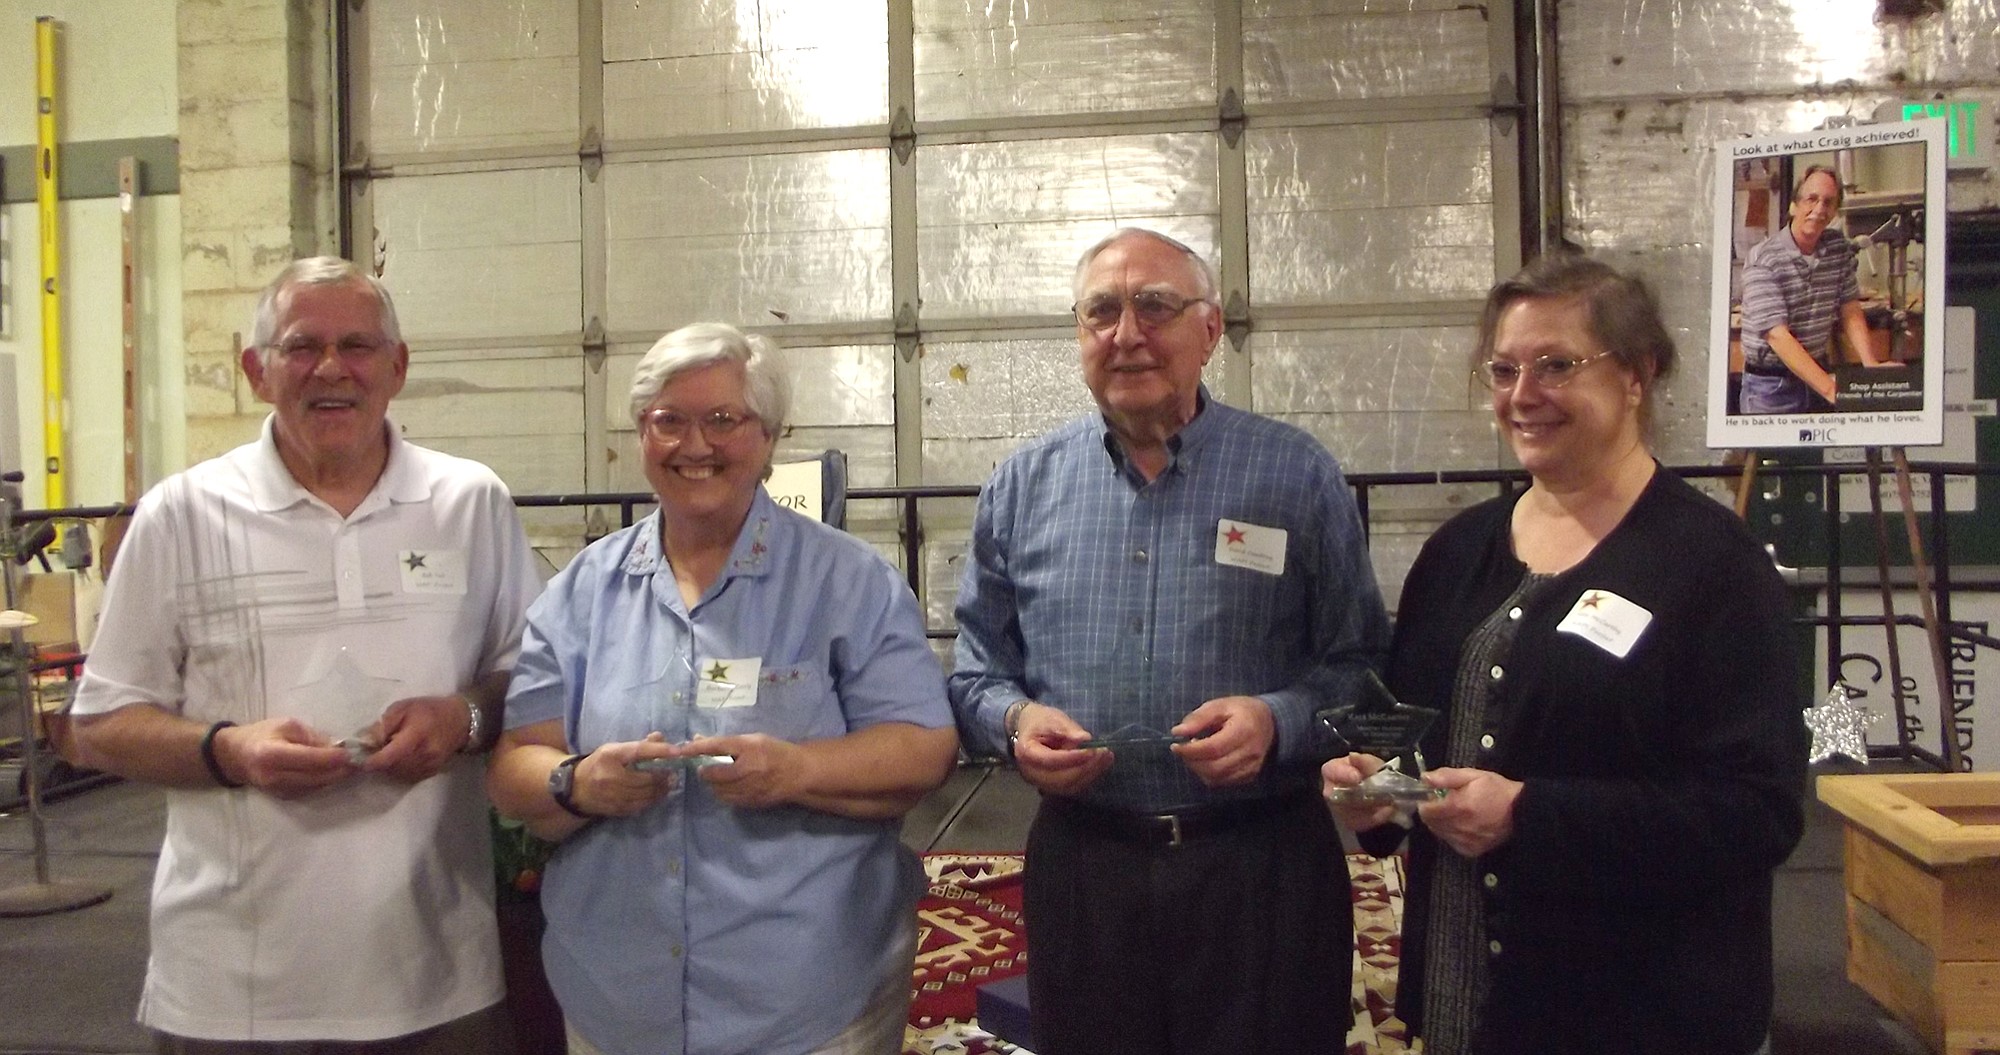 Fruit Valley: Friends of the Carpenter volunteers Bob Tait (left), Barbarita Gately, David Cambrey and Kate McCarthy were honored in April for faithfully building simple water thermometers that help people avoid waterborne diseases.